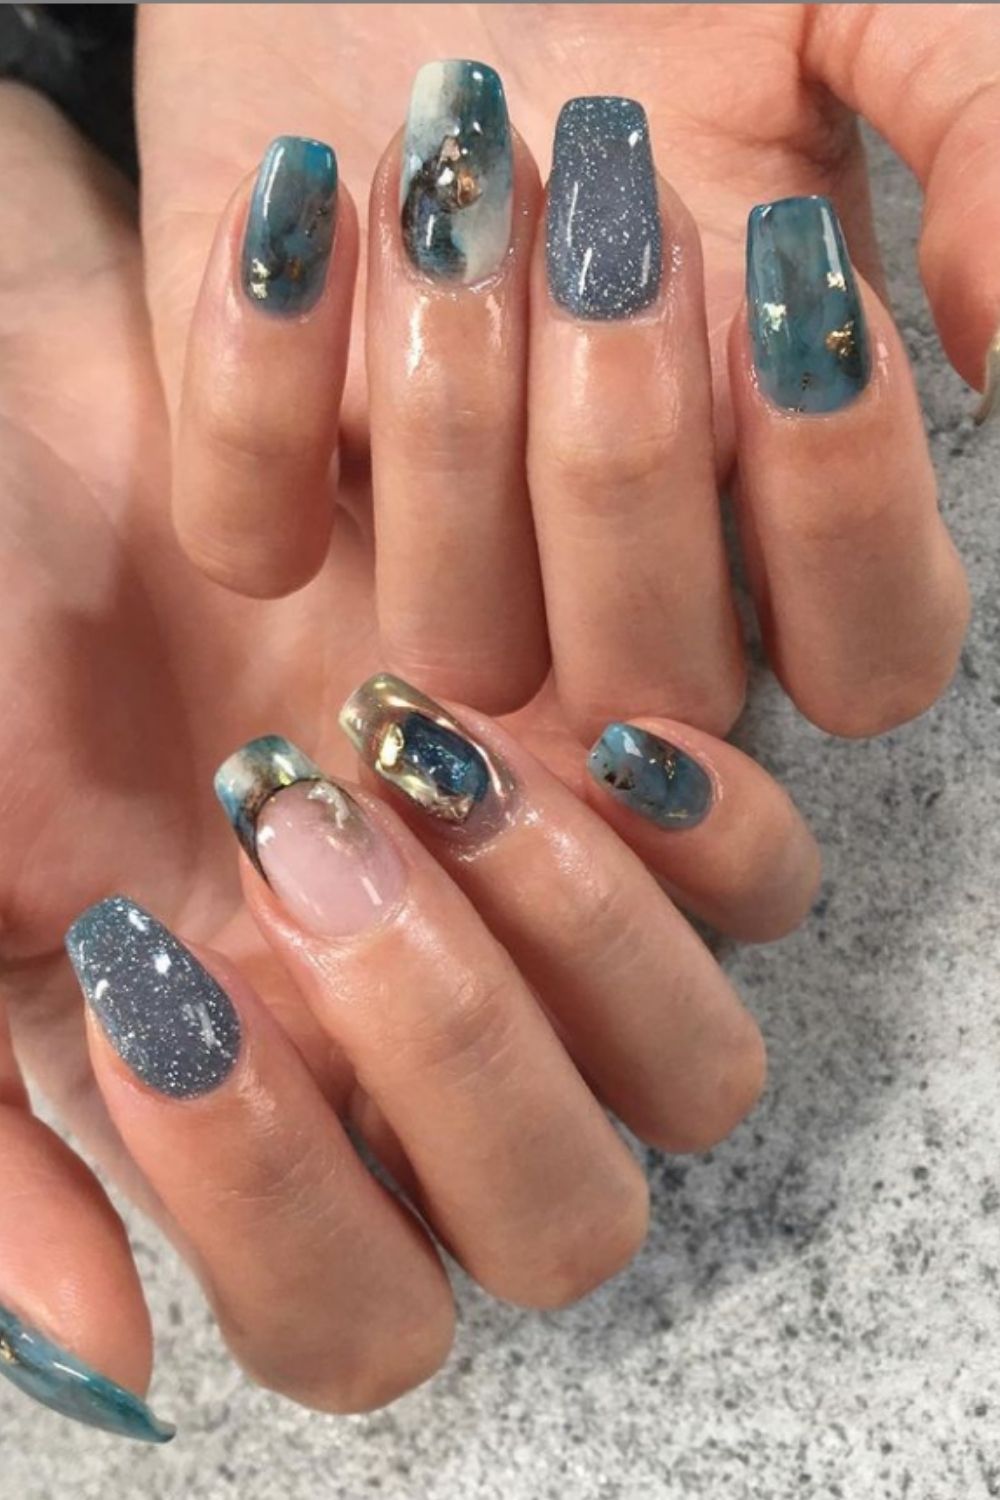 Galaxy nails | The Prettiest Instagram Trend of the Year